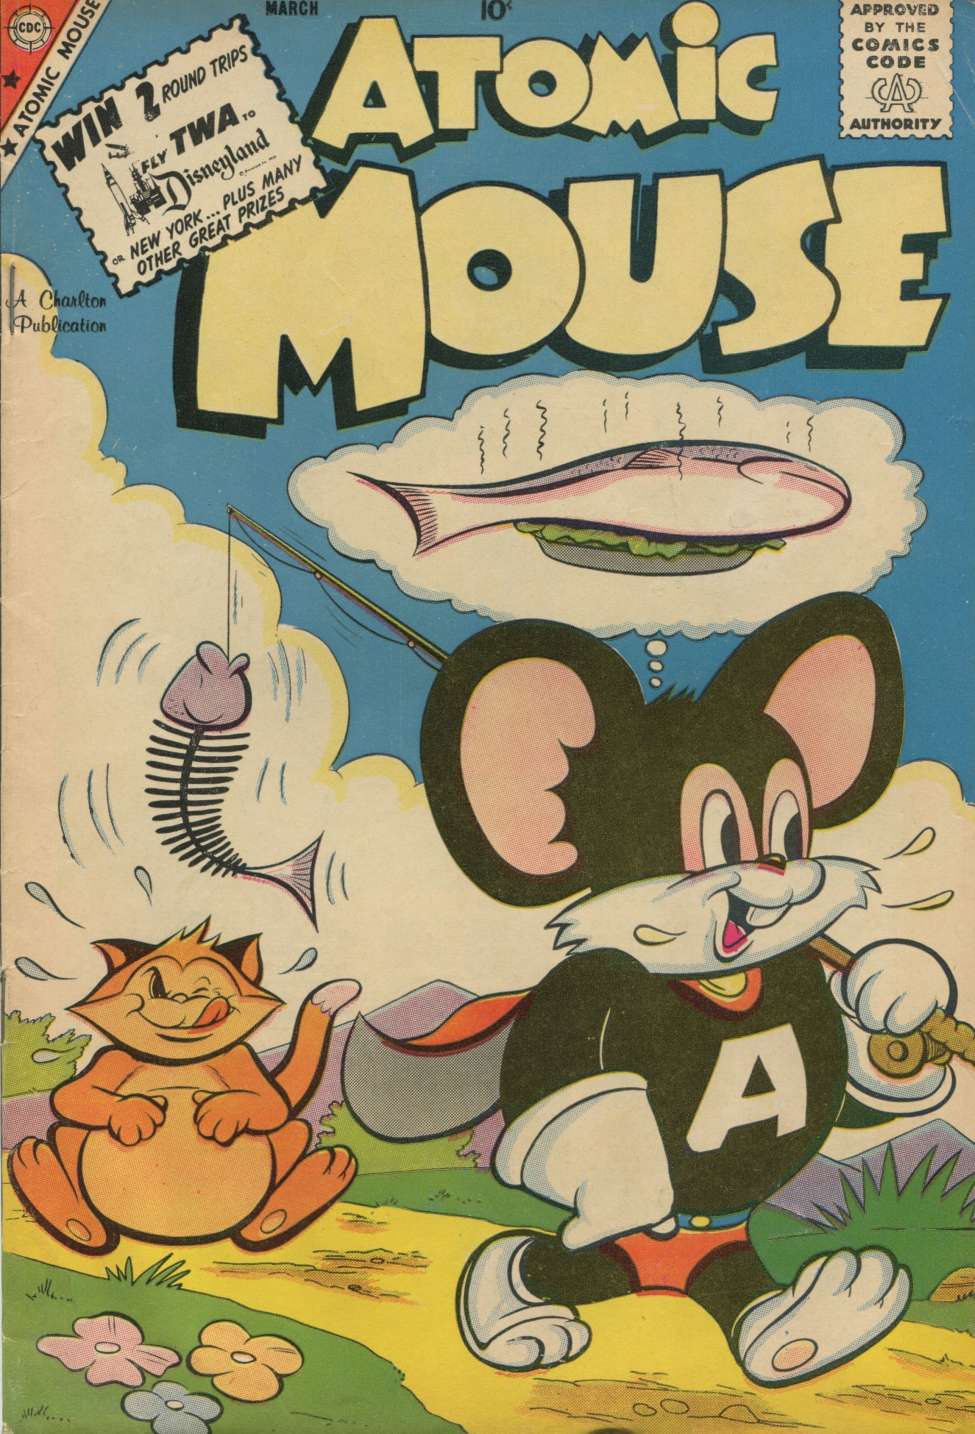 Comic Book Cover For Atomic Mouse 35